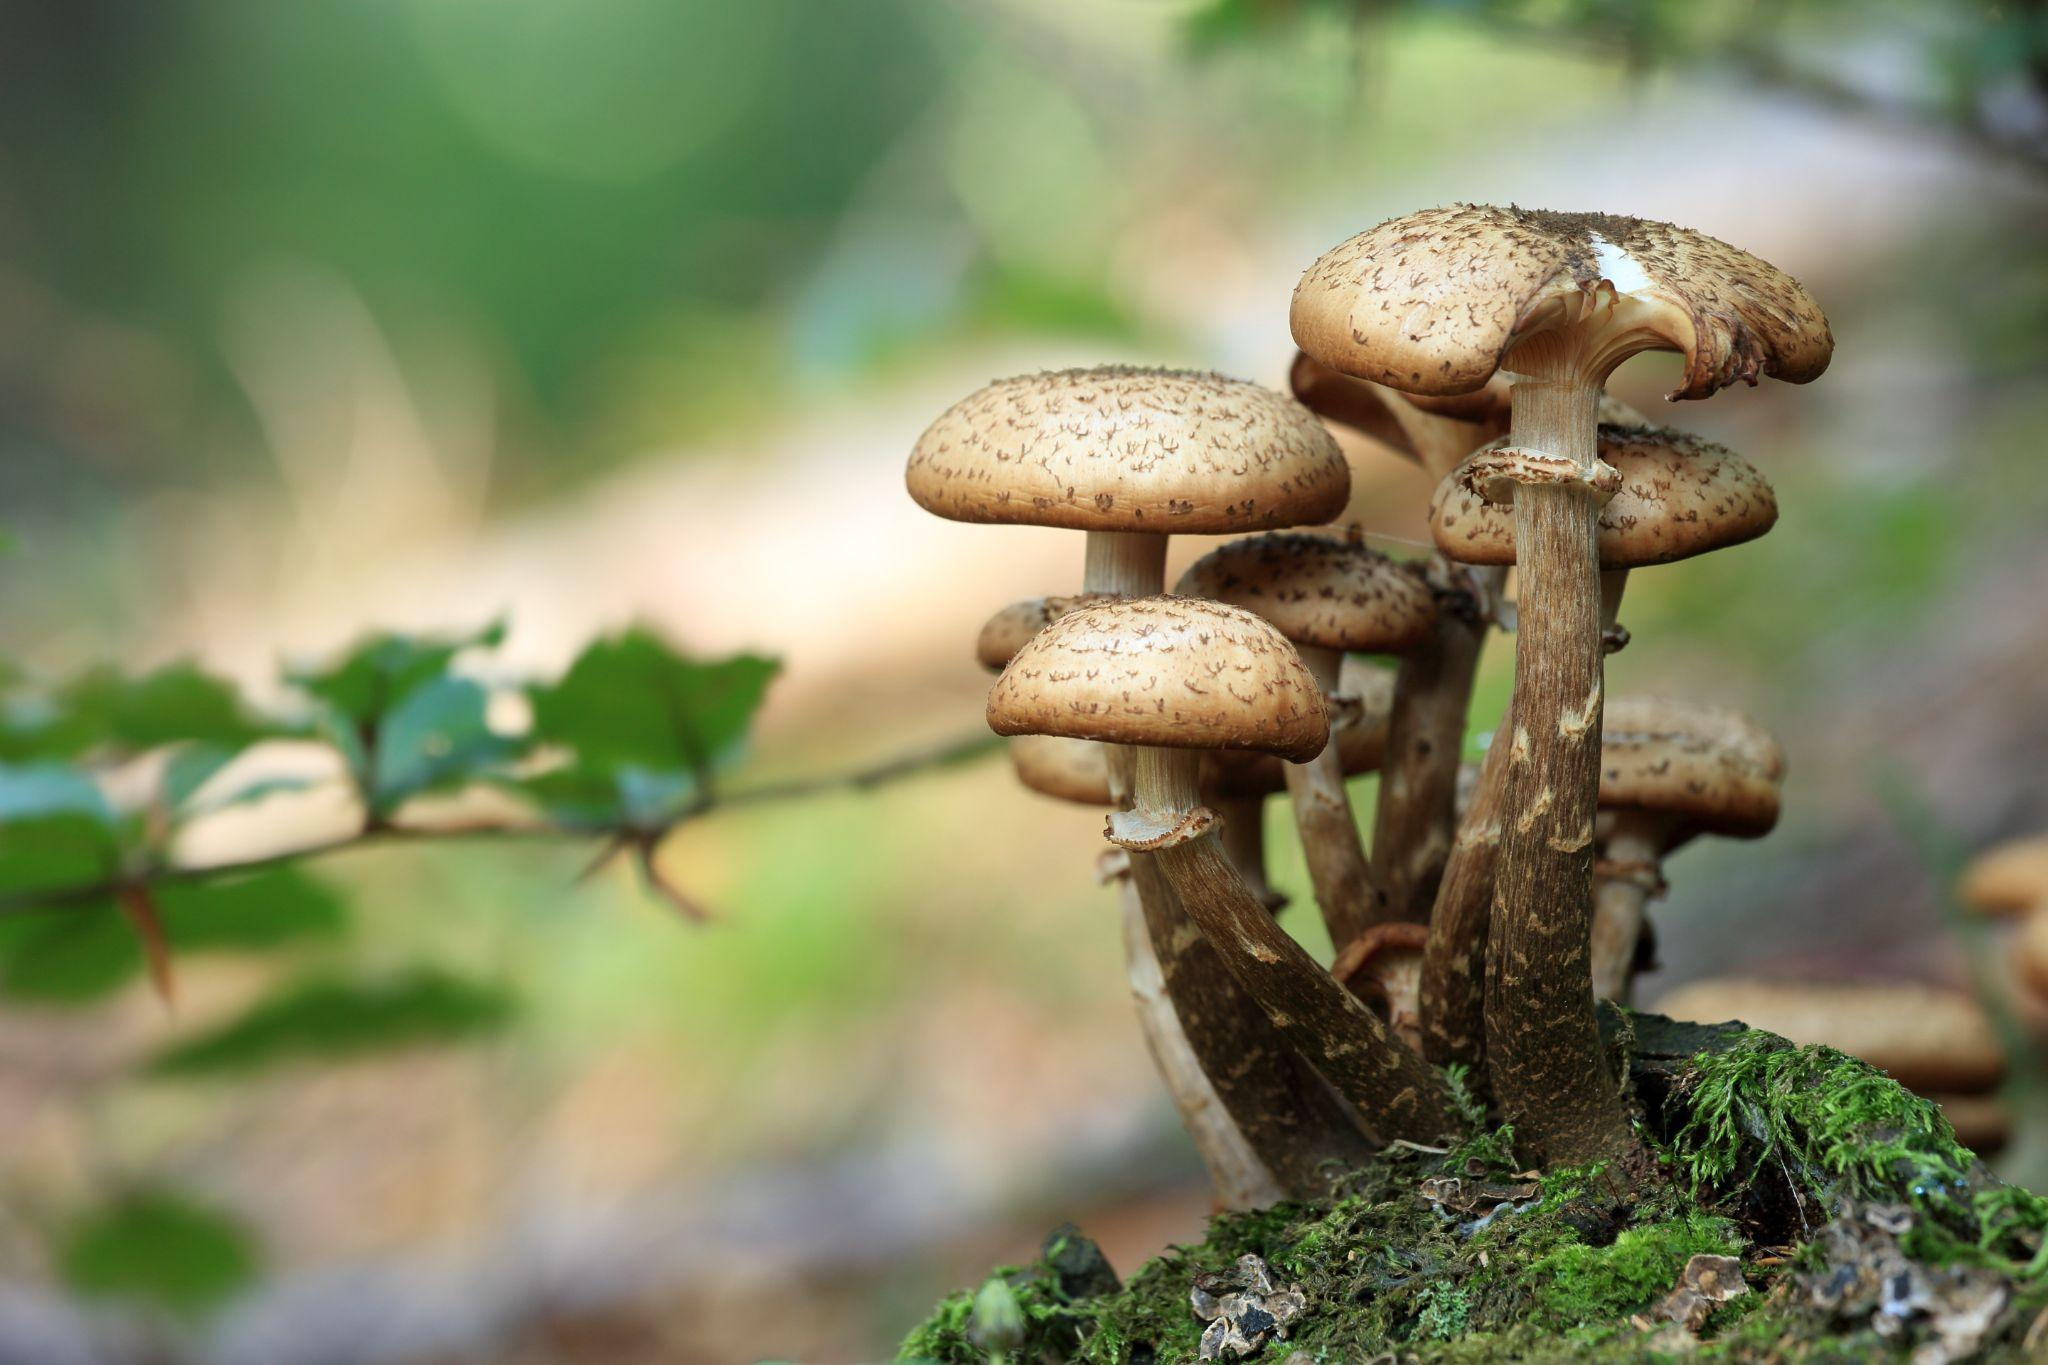 Mushrooms: Key Players in Nutrient Cycling and Decomposition